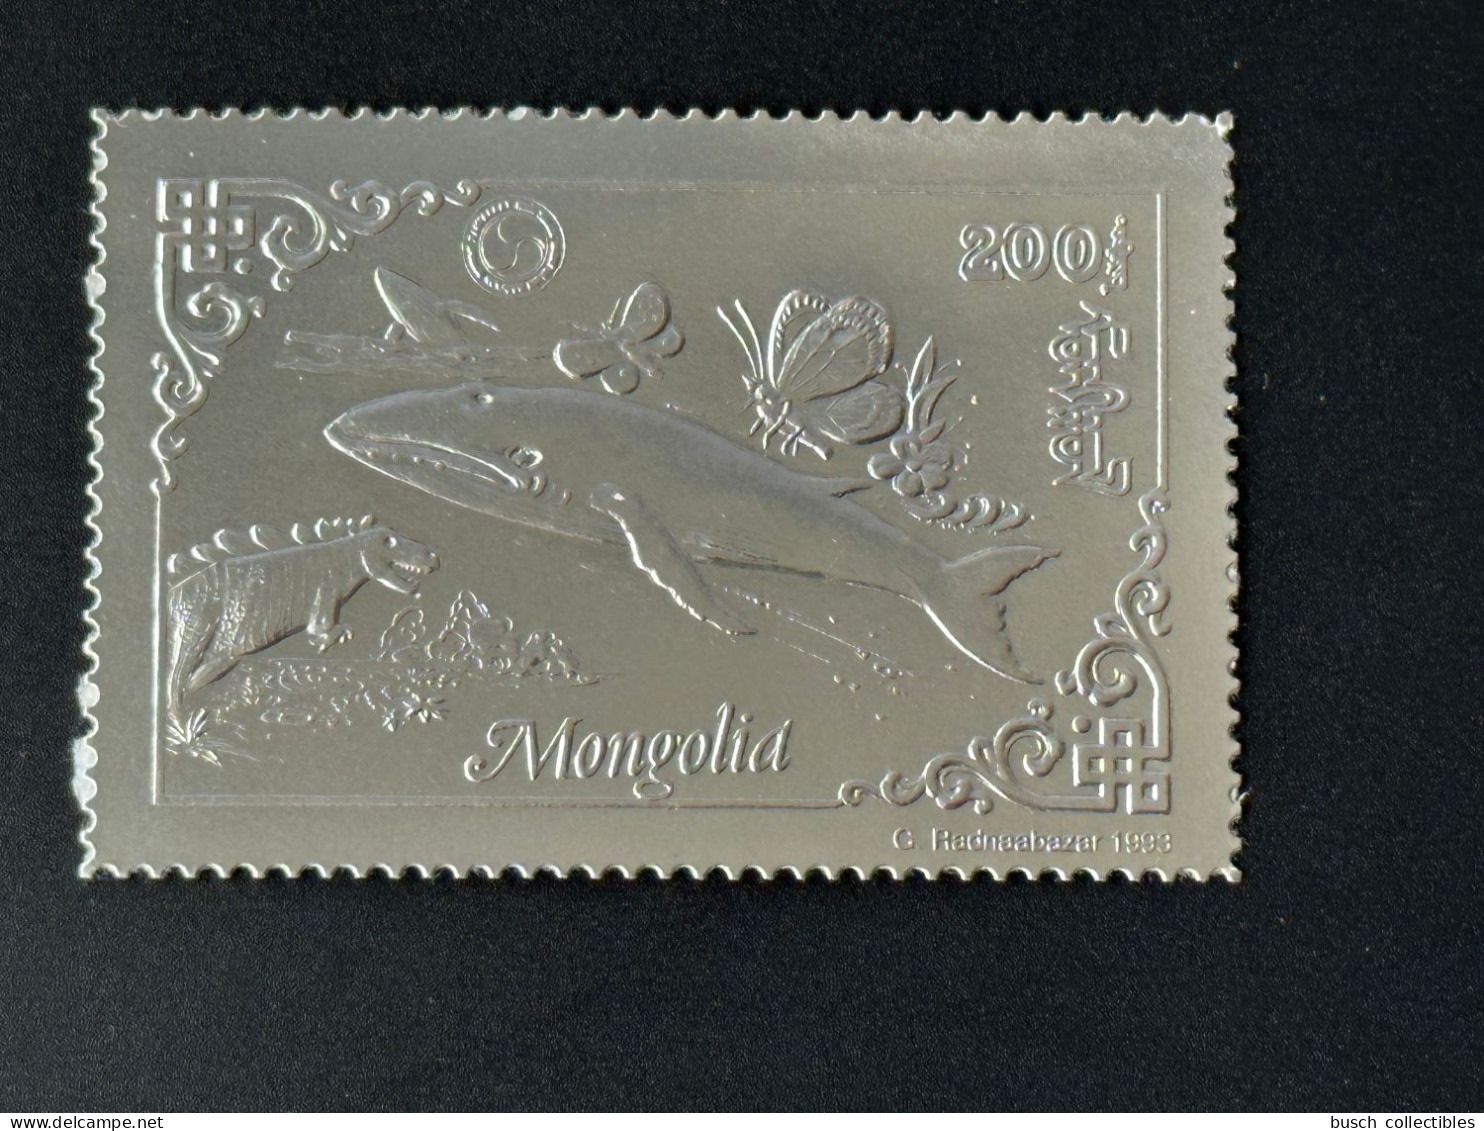 Mongolie Mongolia 1993 Mi. 2472 A Silver Argent Rotary Lions Dinosaur Dinosaure Dinosaurier Wal Whale Baleine Butterfly - Rotary Club